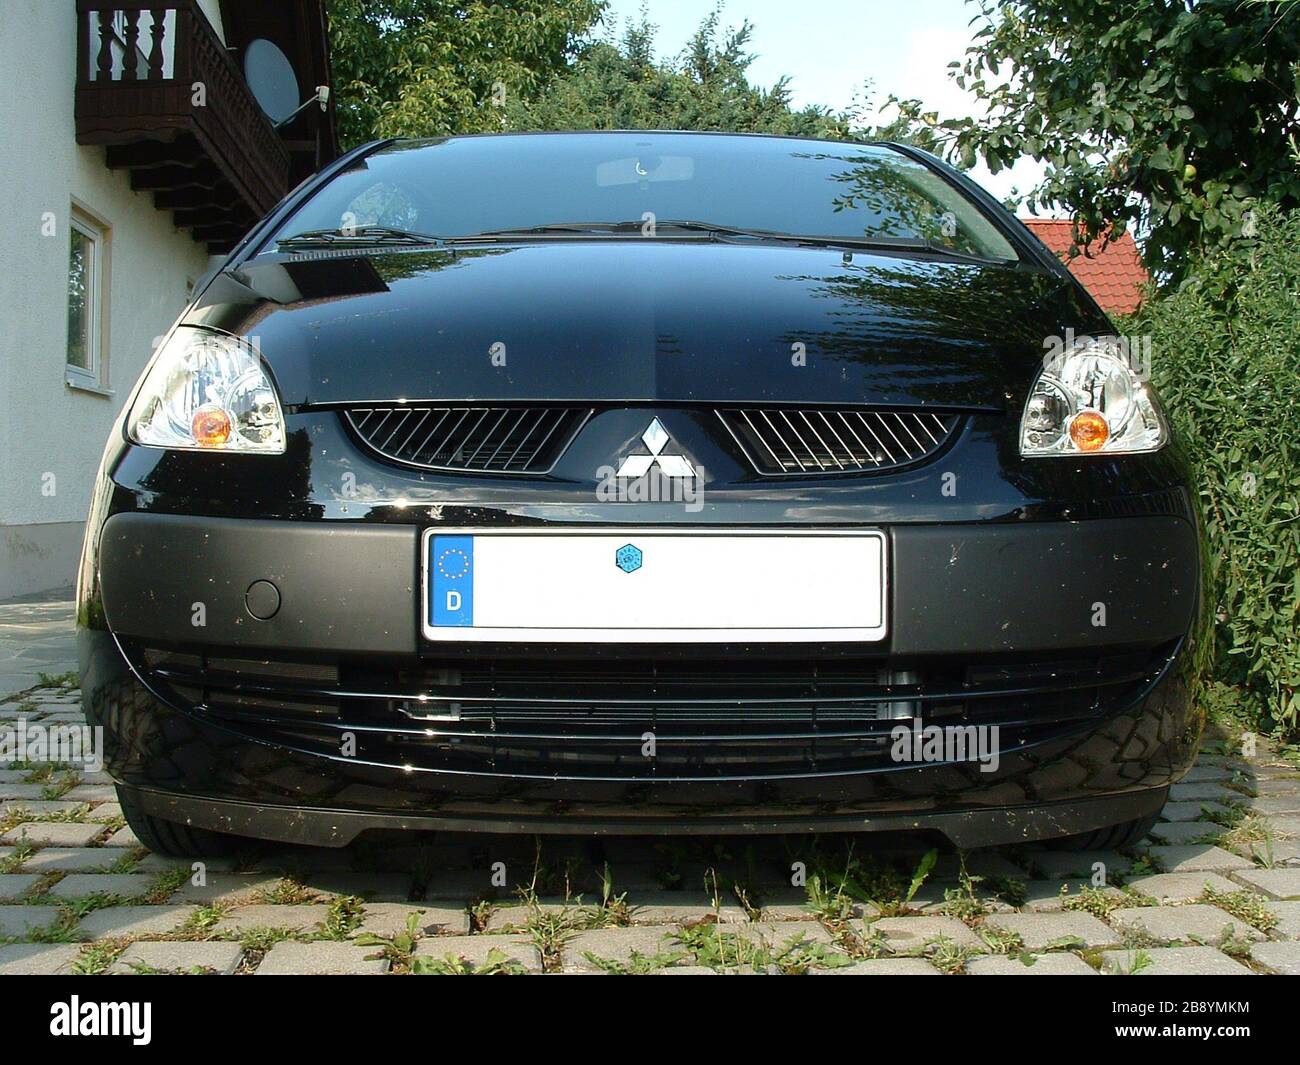 Mitsubishi Colt Cz3 Z30 Baujahr 2005 High Resolution Stock Photography And Images - Alamy